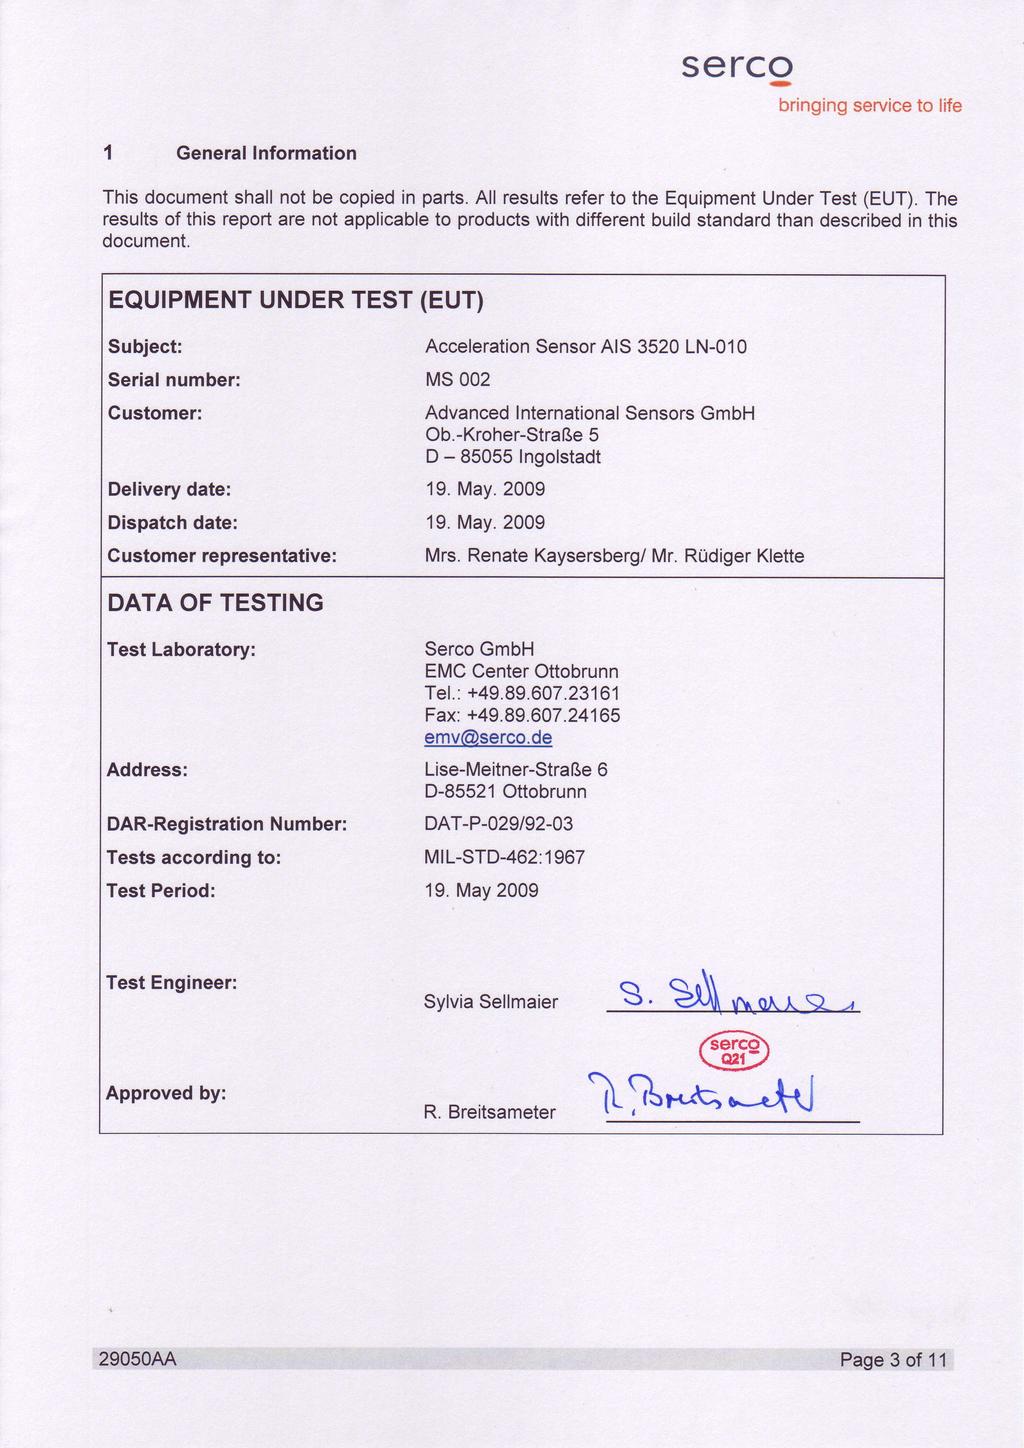 serco?inging seruice to life 1 Generalnformation This document shall not be copied in parts. All results refer to the Equipment Under Test (EUT).